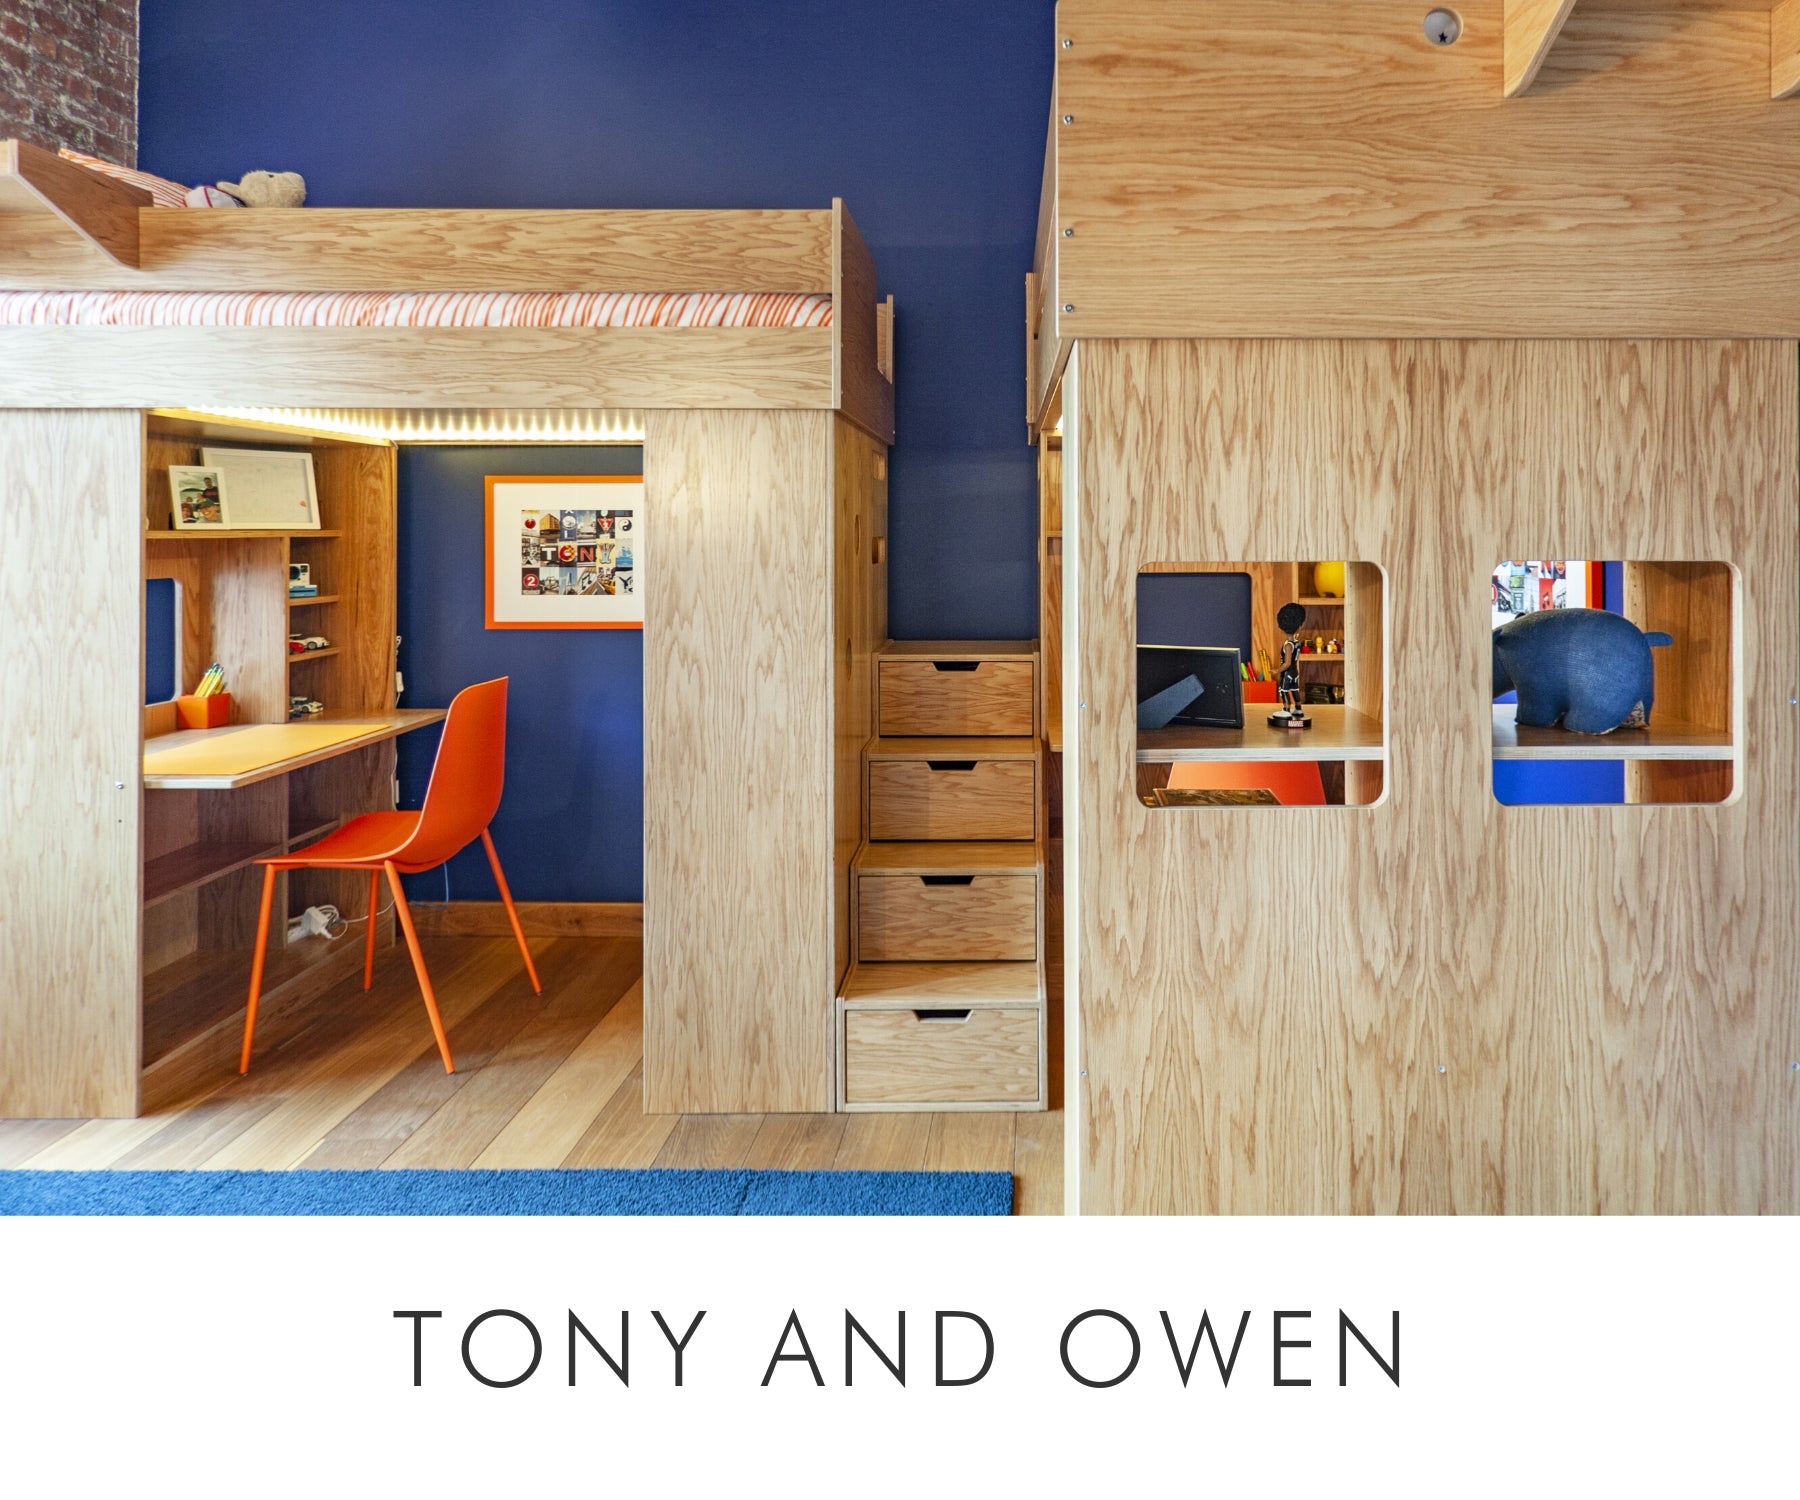 Innovative room with a loft bed, study area, wooden cabinetry, and blue accents on the walls.